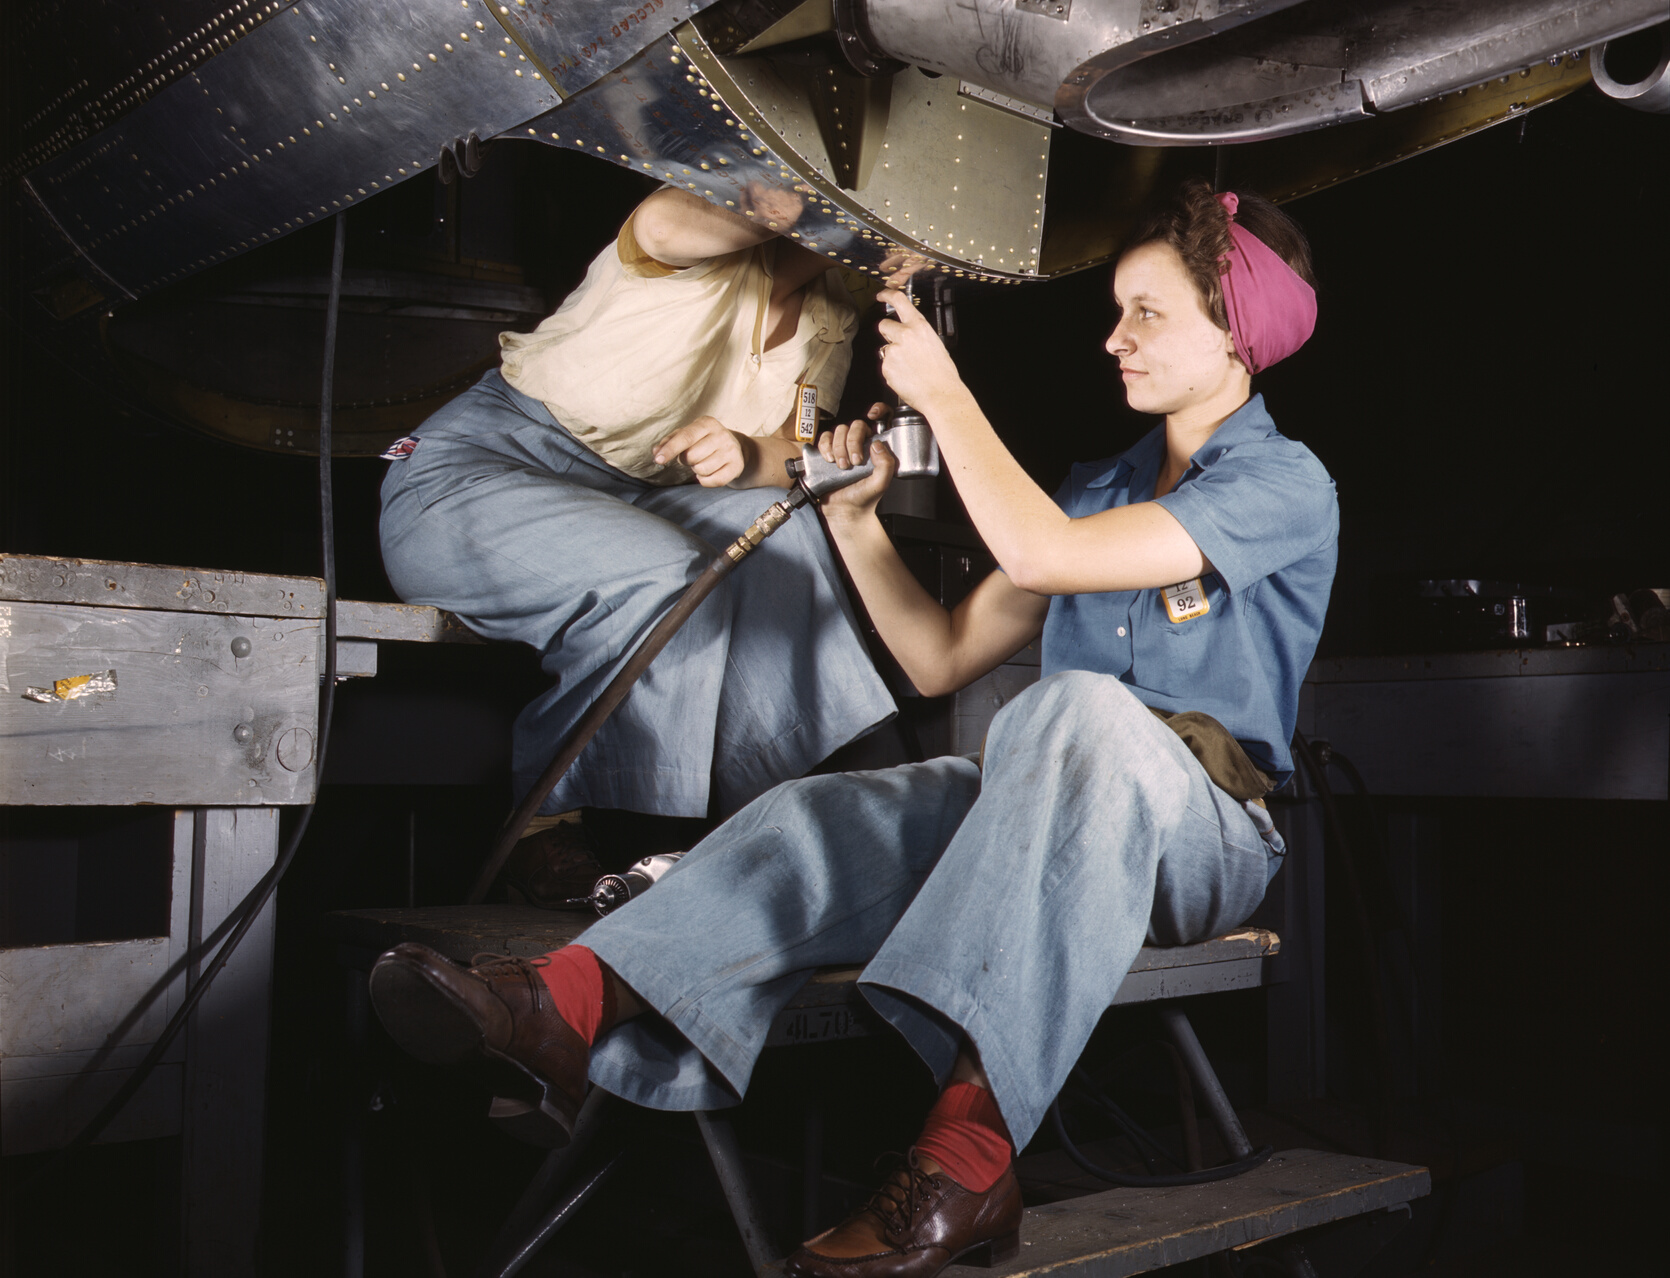 Women at work on bomber, Douglas Aircraft Company, Alfred T. Palmer, 1942,Prints & Photographs Division, Library of Congress, LC-DIG-fsac-1a35341.